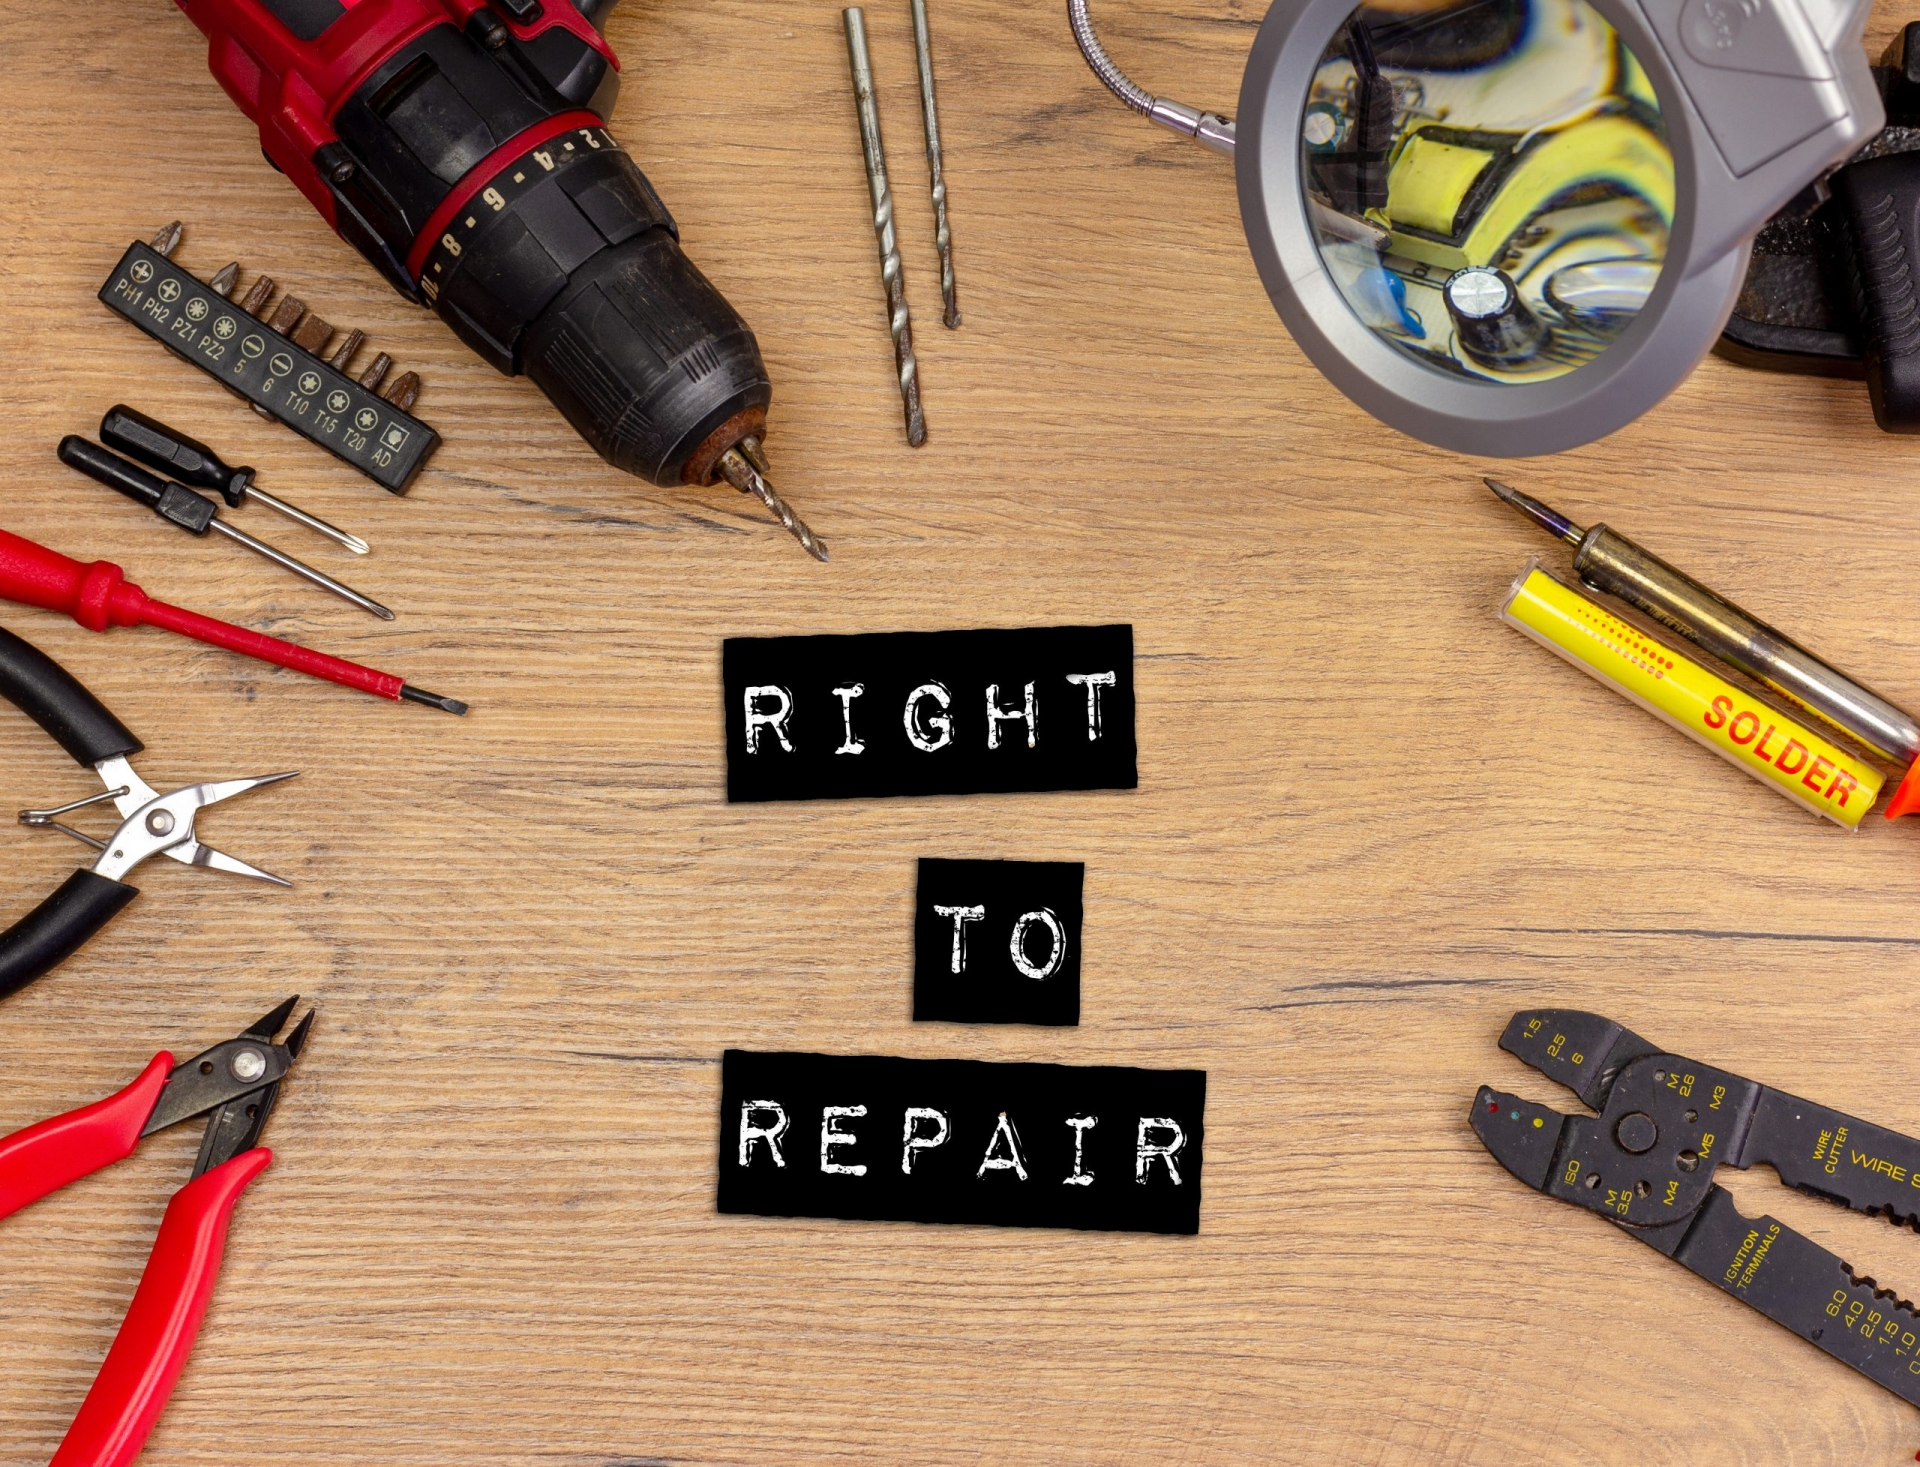 Right to repair. Photo: The Recycler